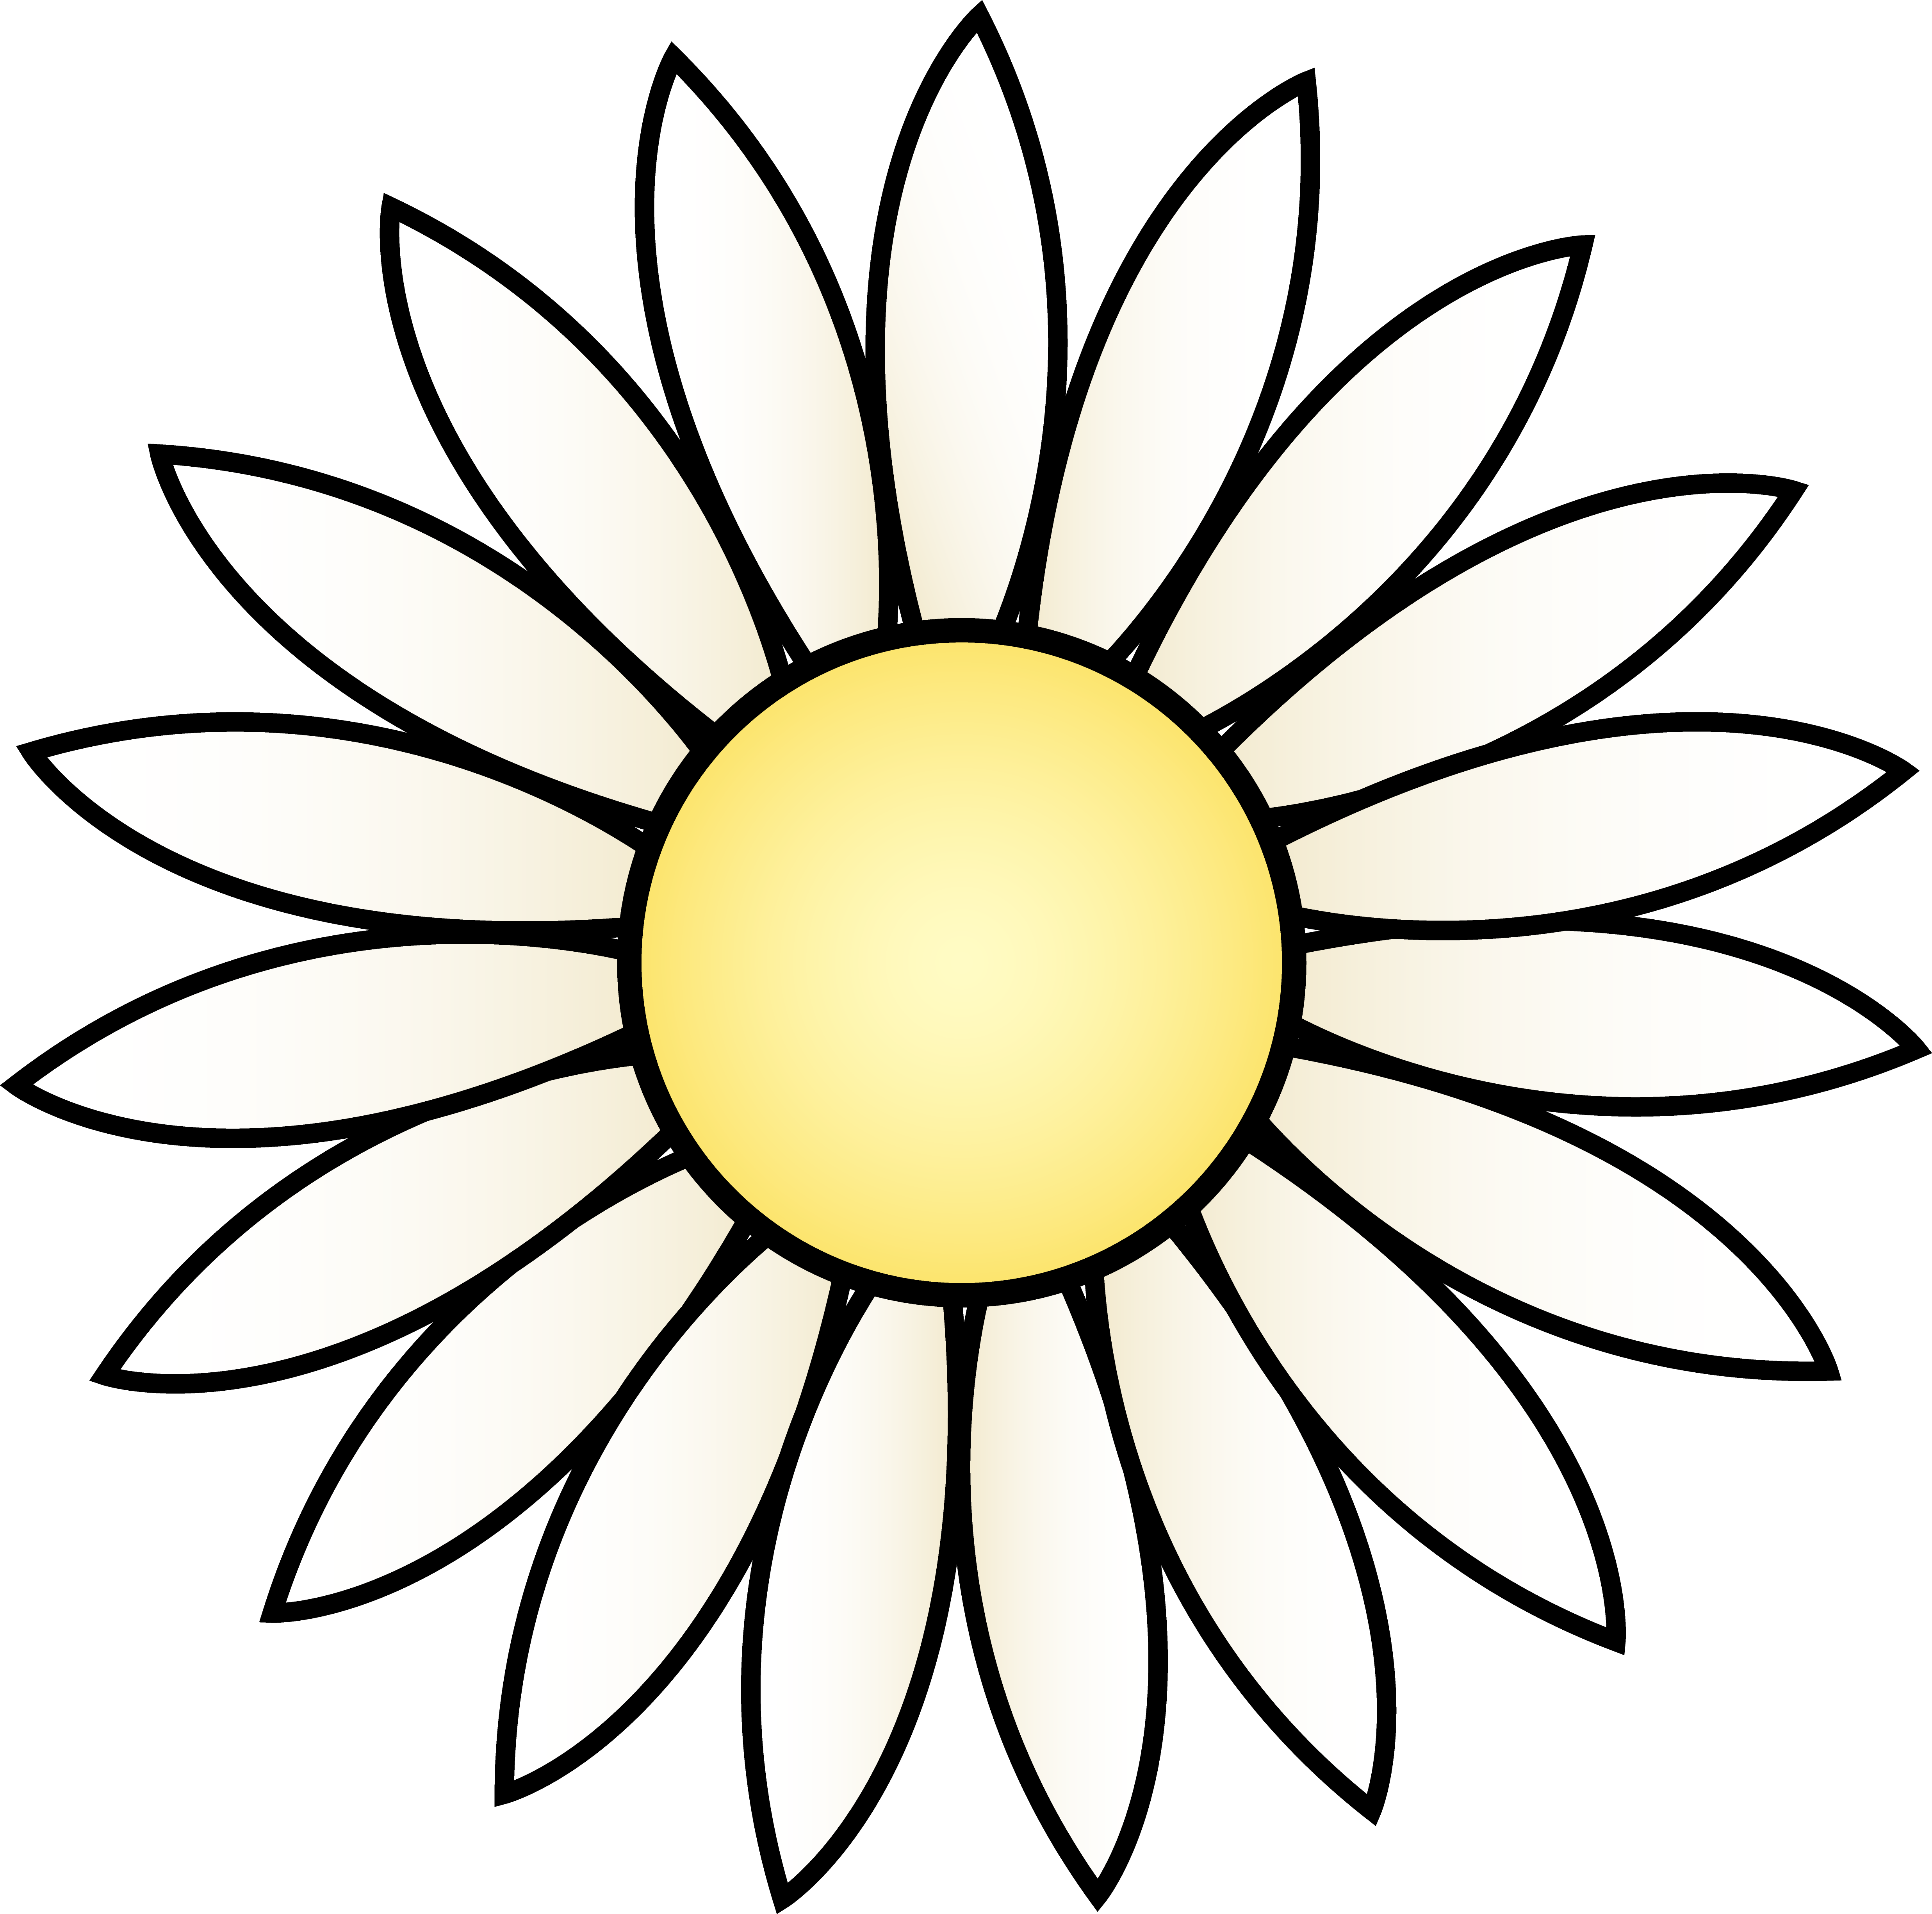 Daisy Clip Art Free | Clipart library - Free Clipart Images